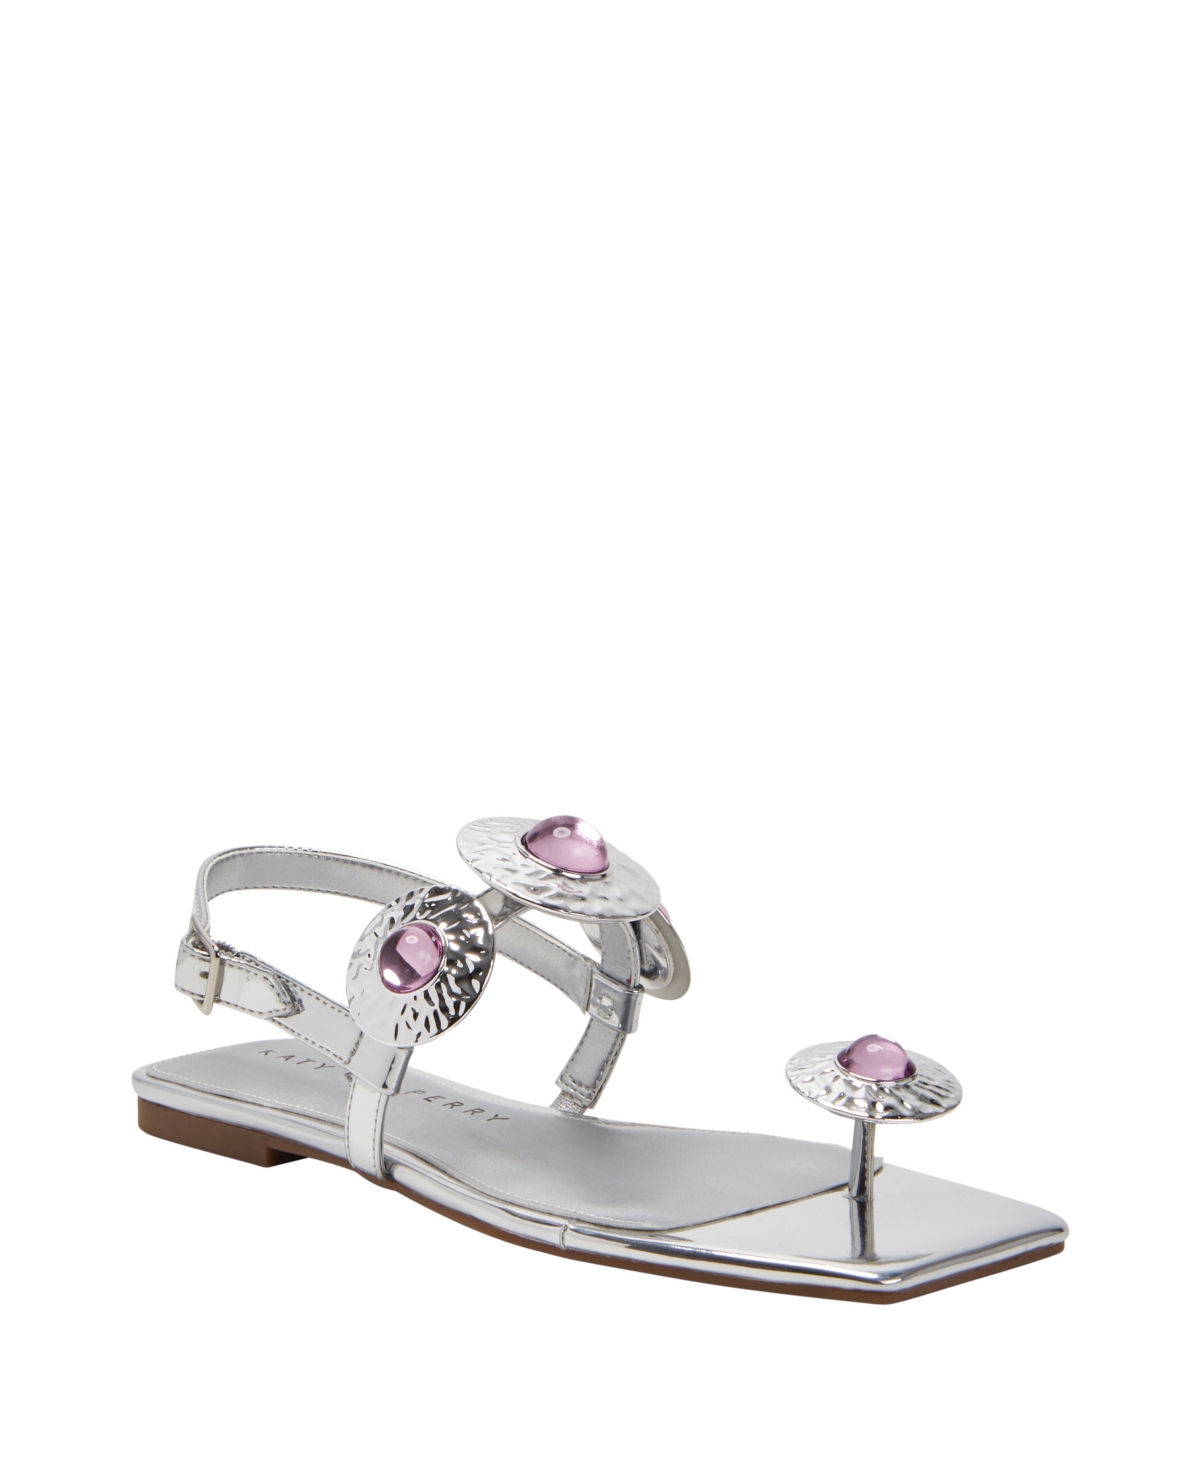 Katy Perry Women's Camie Stone Square Toe Sandals In Silver